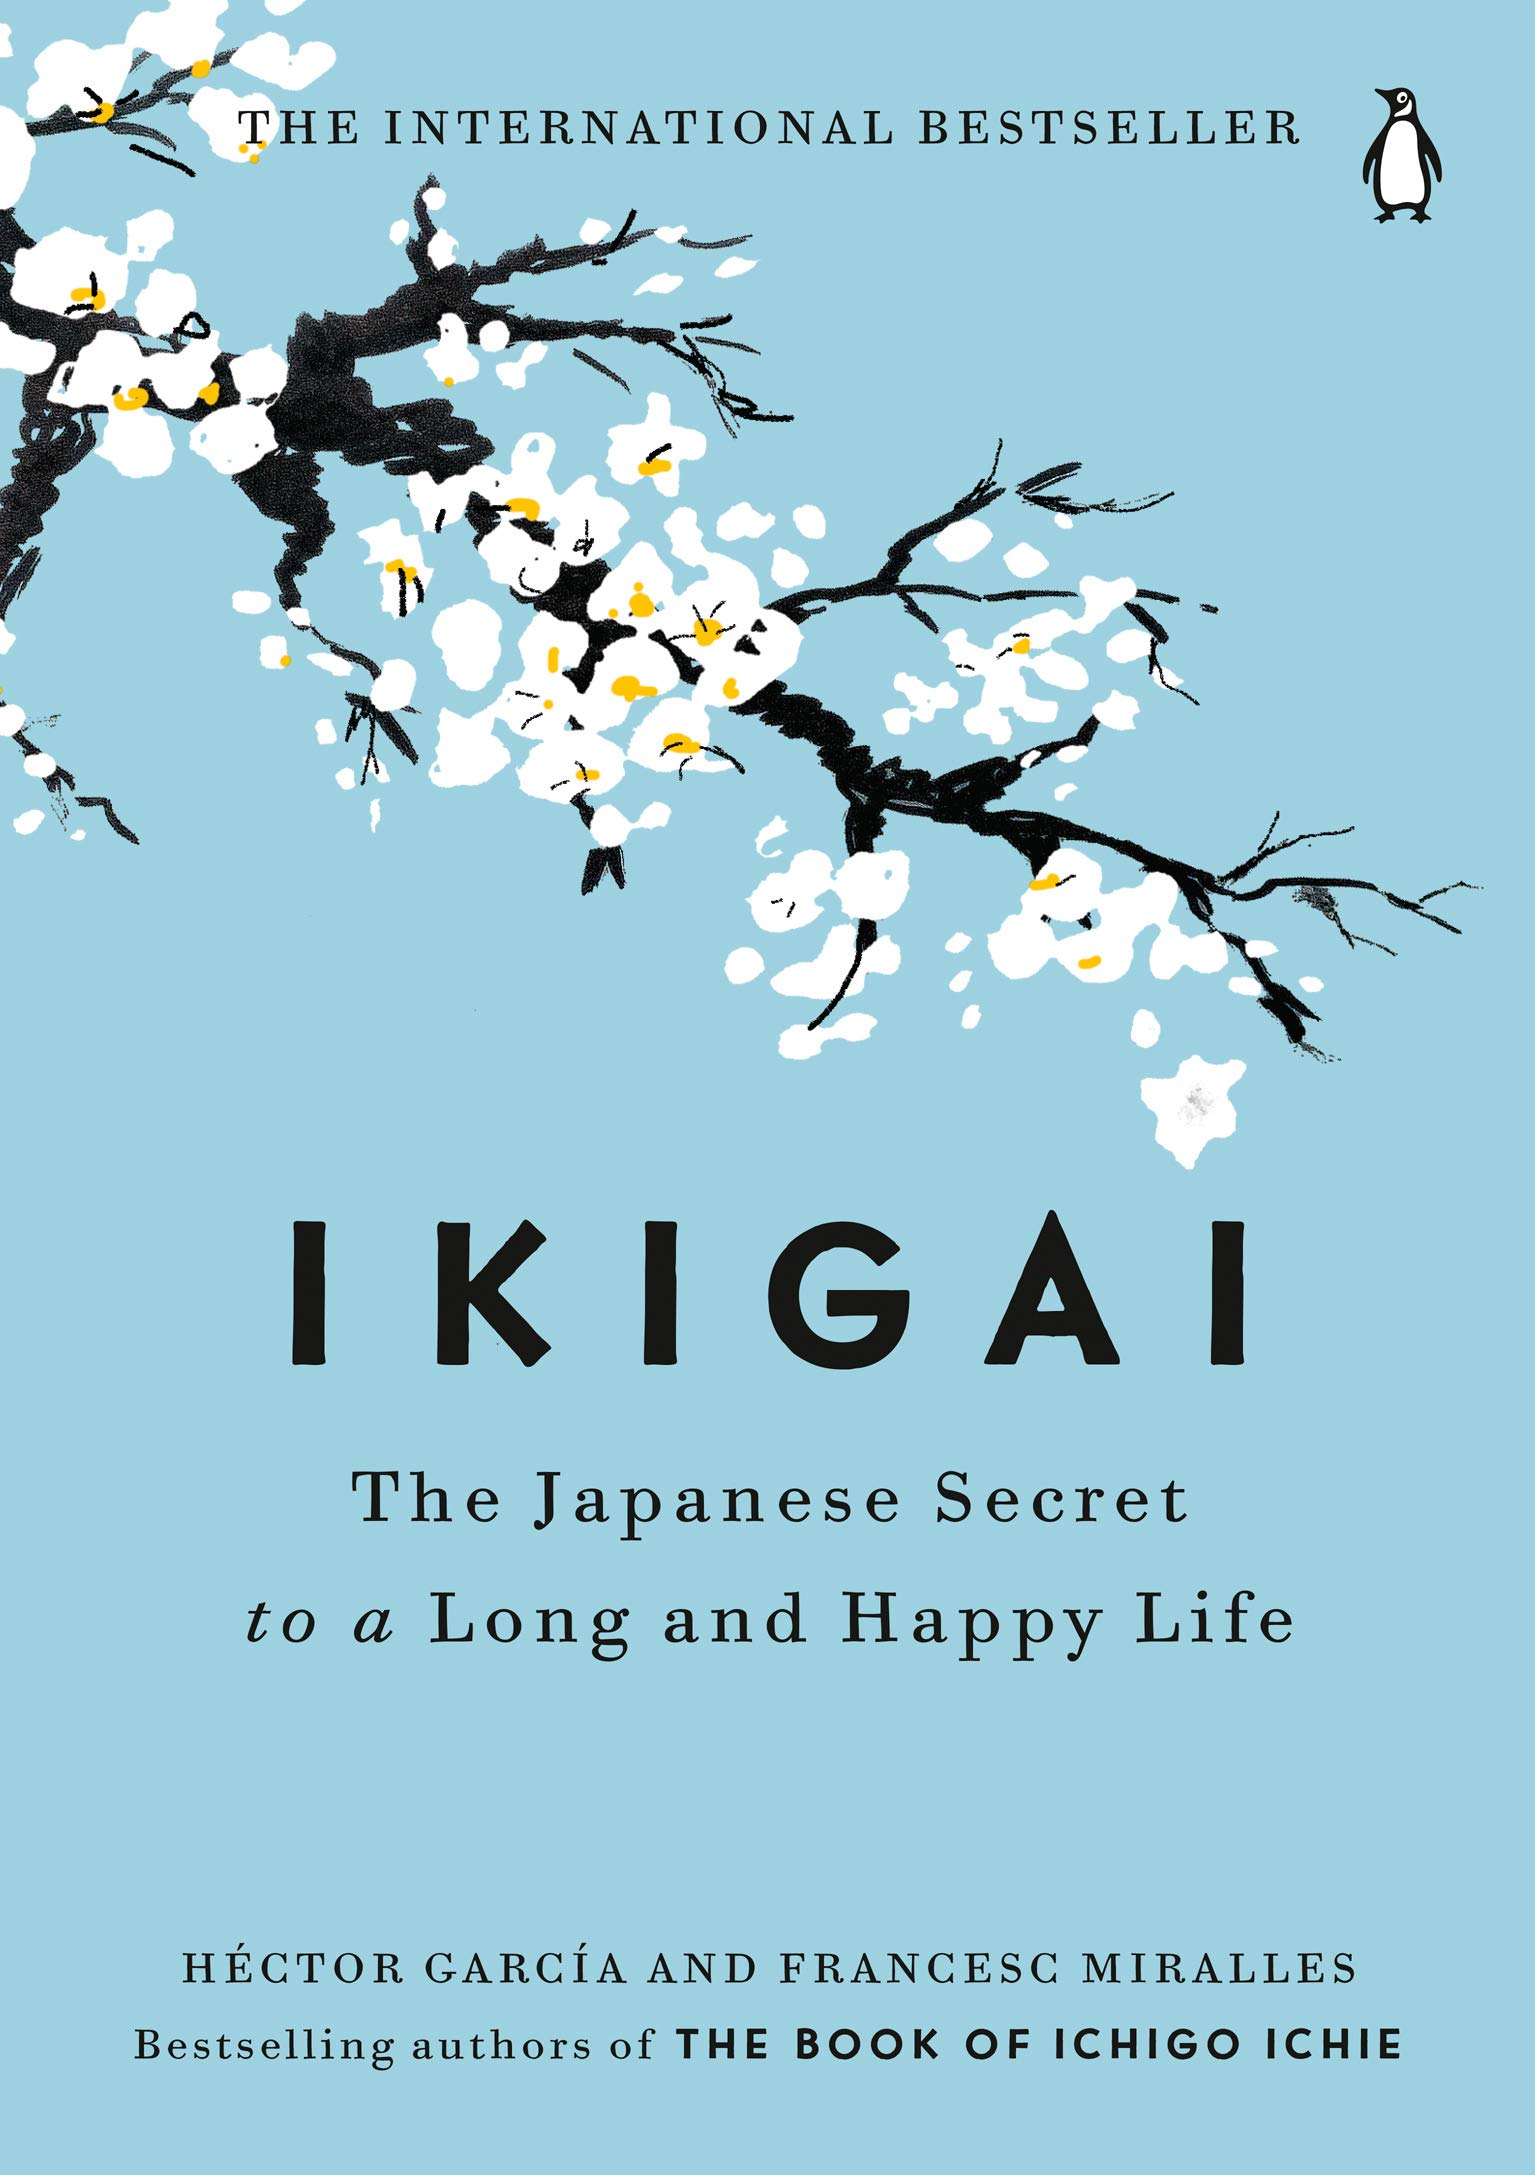 Ikigai: The Japanese Secret to a Long and Happy Life